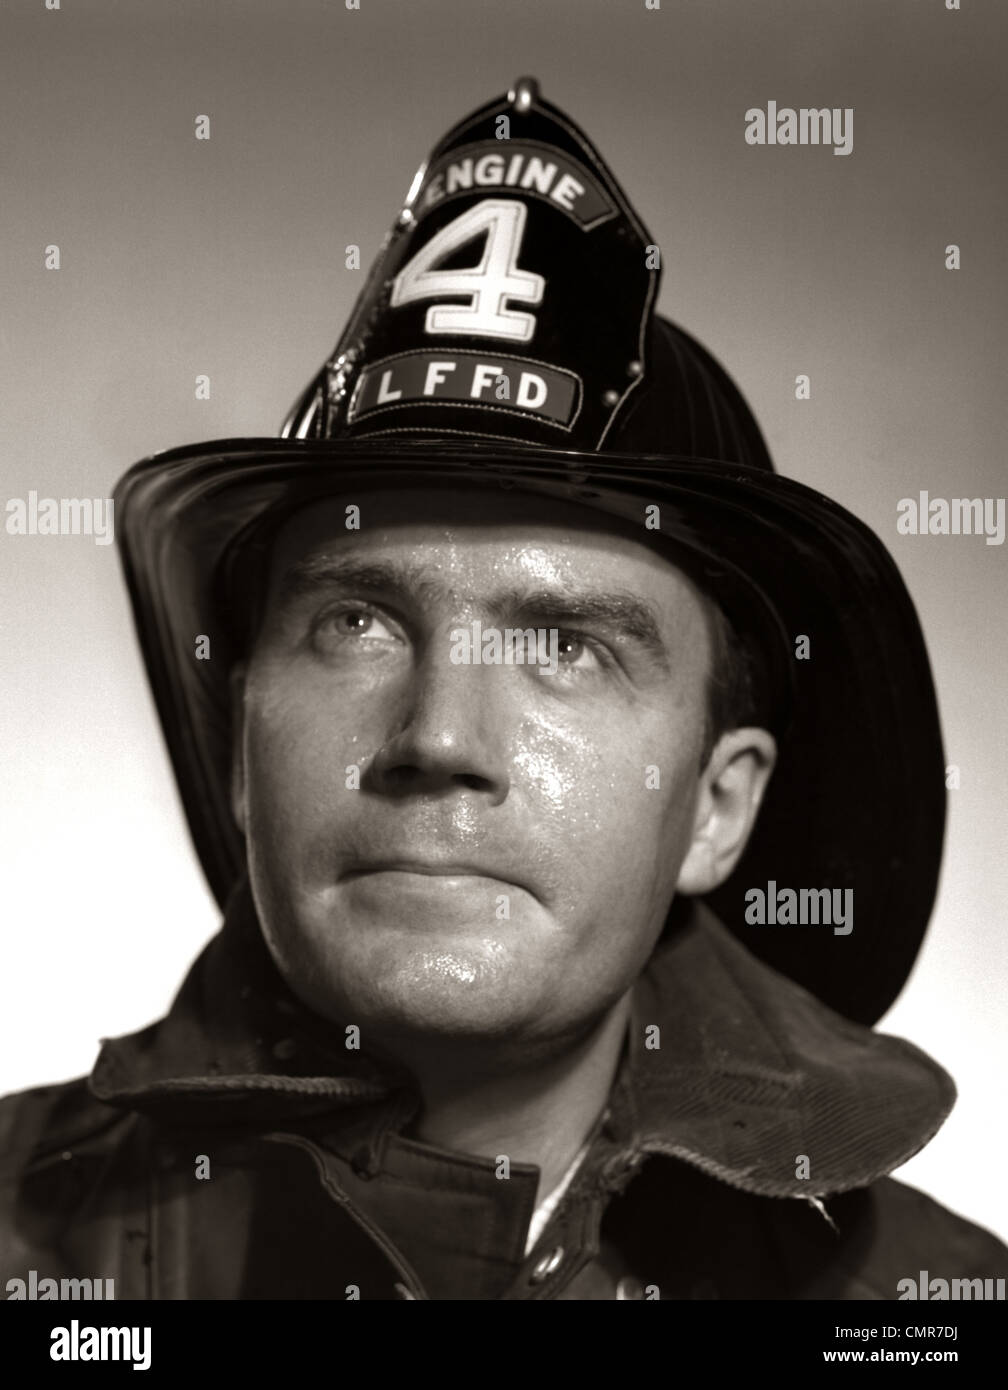 1950s PORTRAIT FIREMAN SERIOUS EXPRESSION METAL FIRE HARD HAT ENGINE 4 Stock Photo